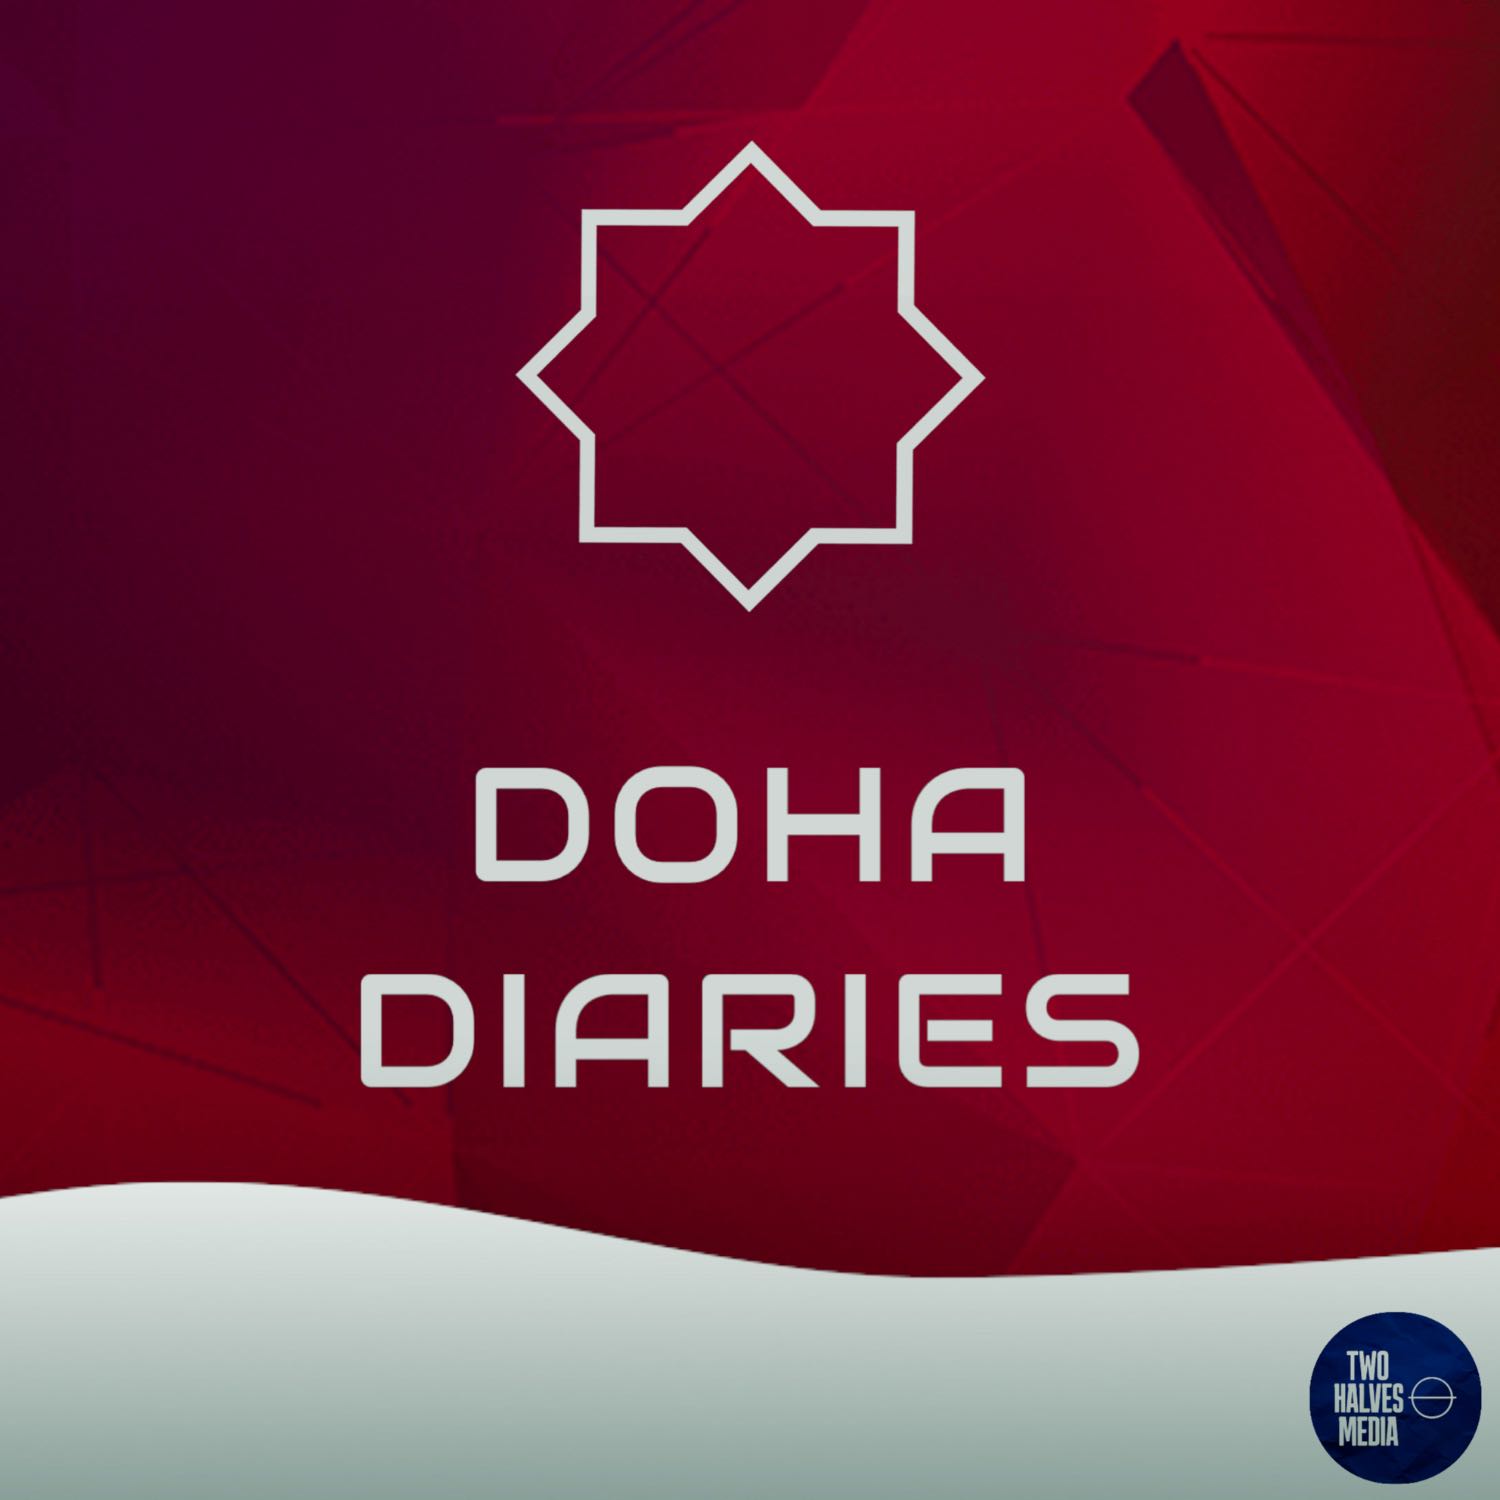 Doha Diaries #4 - Lionel Messi's Crowing Moment | The Best World Cup Final Ever? | World Cup Review